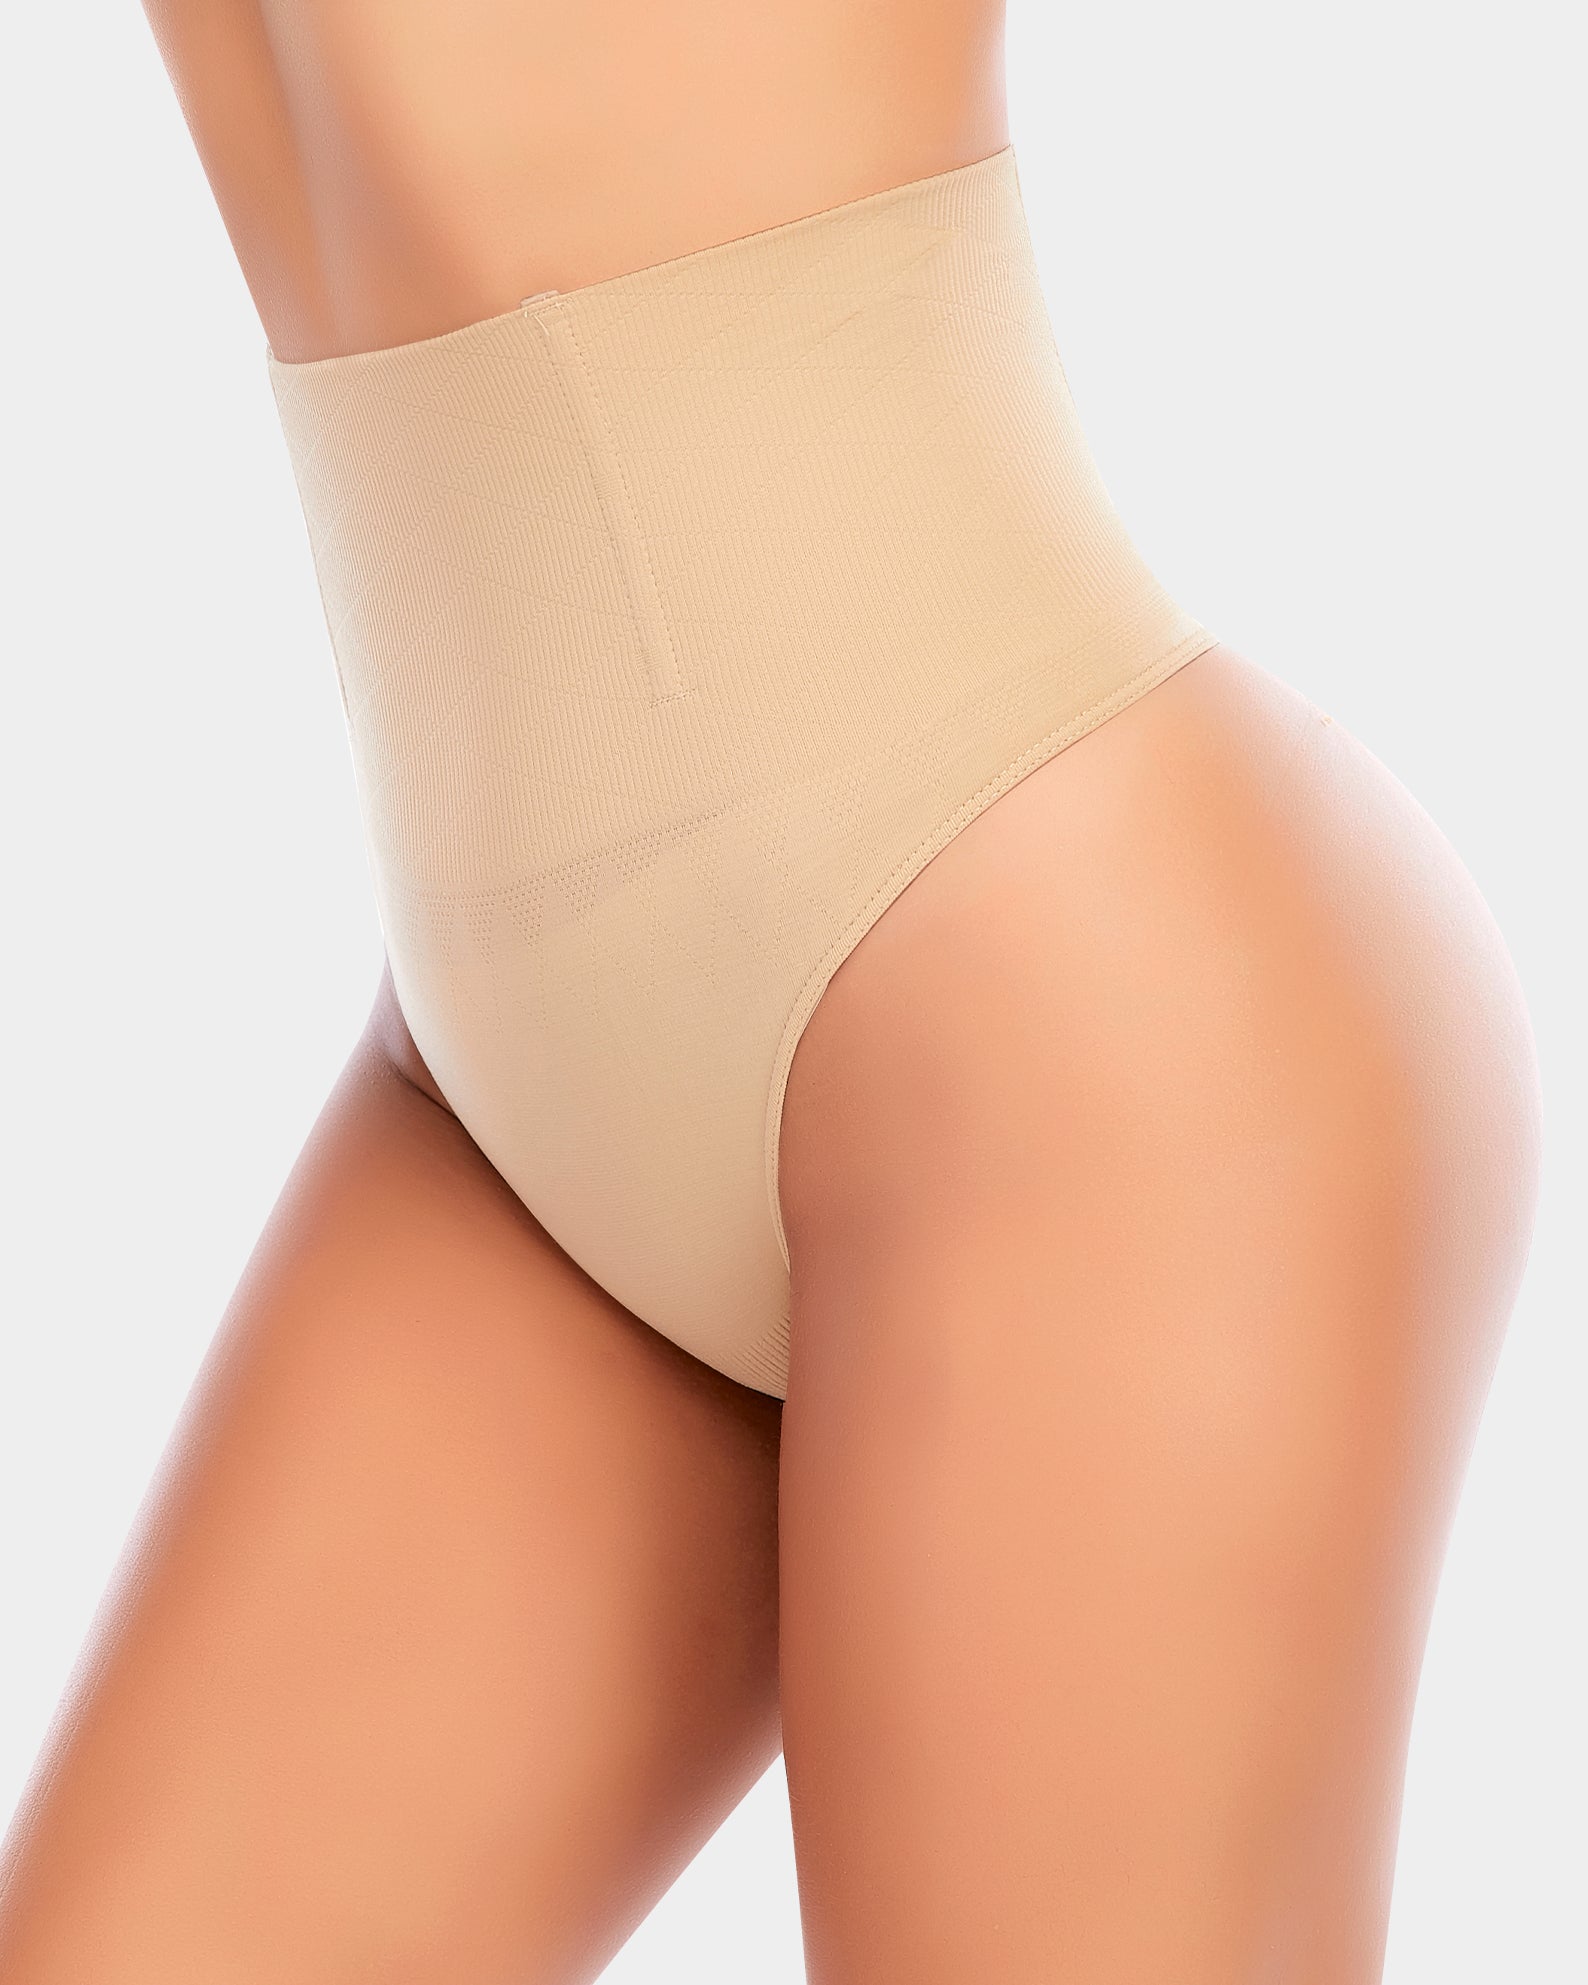 Elevate Your Style and Confidence with Our Best Seller Shapewear